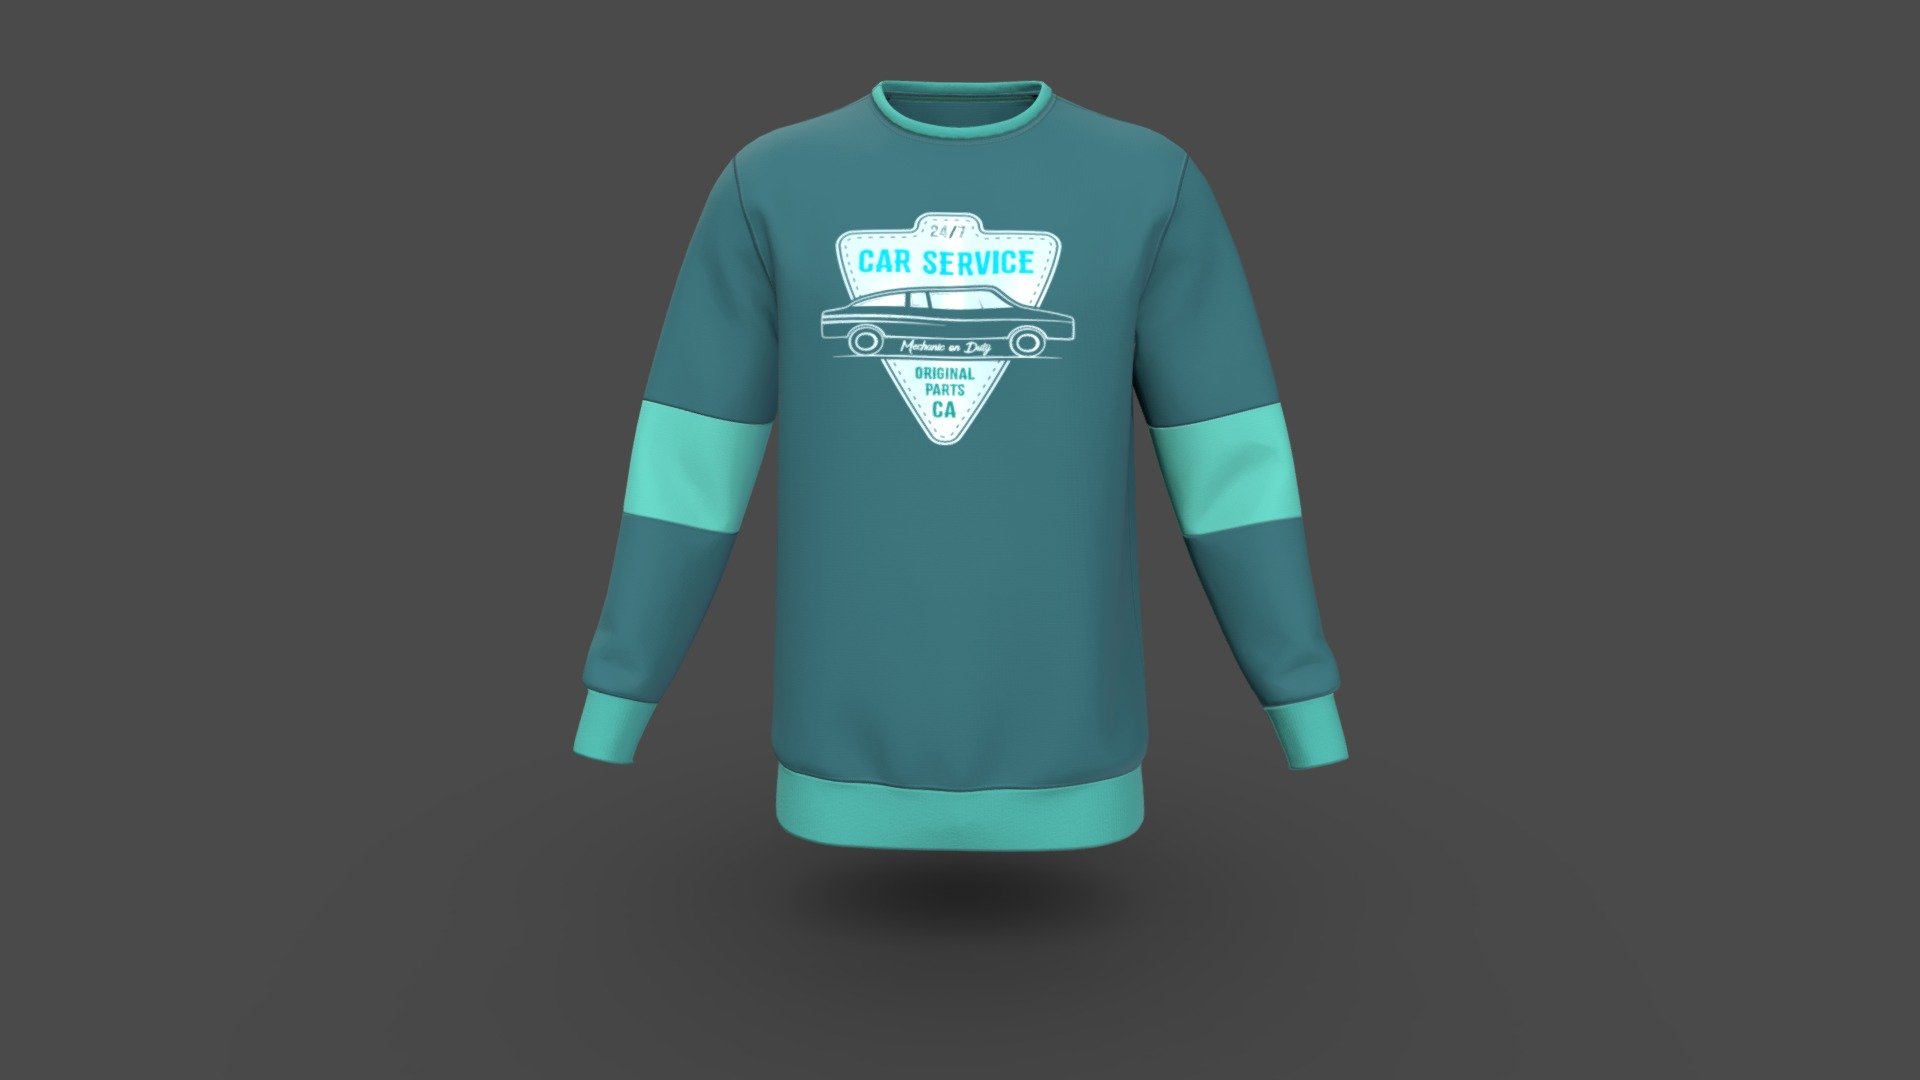 Men Color Block Sweatshirt
Version V1.0

Realistic high detailed Men Sweatshirt with high resolution textures. Model created by our unique processing &amp; Optimized for 3D web and AR / VR

Features

Optimized &amp; NON-Optimized obj model with 4K texture included




Optimized for AR/VR/MR

4K &amp; 2K fabric texture and print details

Optimized model is 794KB

NON-Optimized model is 14.1MB

Knit fabric texture and print details included

GLB file in 2k texture size is 2.68MB

GLB file in 4k texture size is 11.4MB

Suitable for web application configurator development.

Fully unwrap UV

The model has 1 material

Includes high detailed normal map

Unit measurment was inch

Texture map: Base color, OcclusionRoughnessMetallic(ORM), Normal

NB: Tpose &amp; Apose Model available with request.

We make the digital 3D apparel design service affordable and compatible for your fast moving business.
For more details or custom order send email: hello@binarycloth.com


Website:binarycloth.com - Men Color Block Sweatshirt - Buy Royalty Free 3D model by BINARYCLOTH (@binaryclothofficial) 3d model